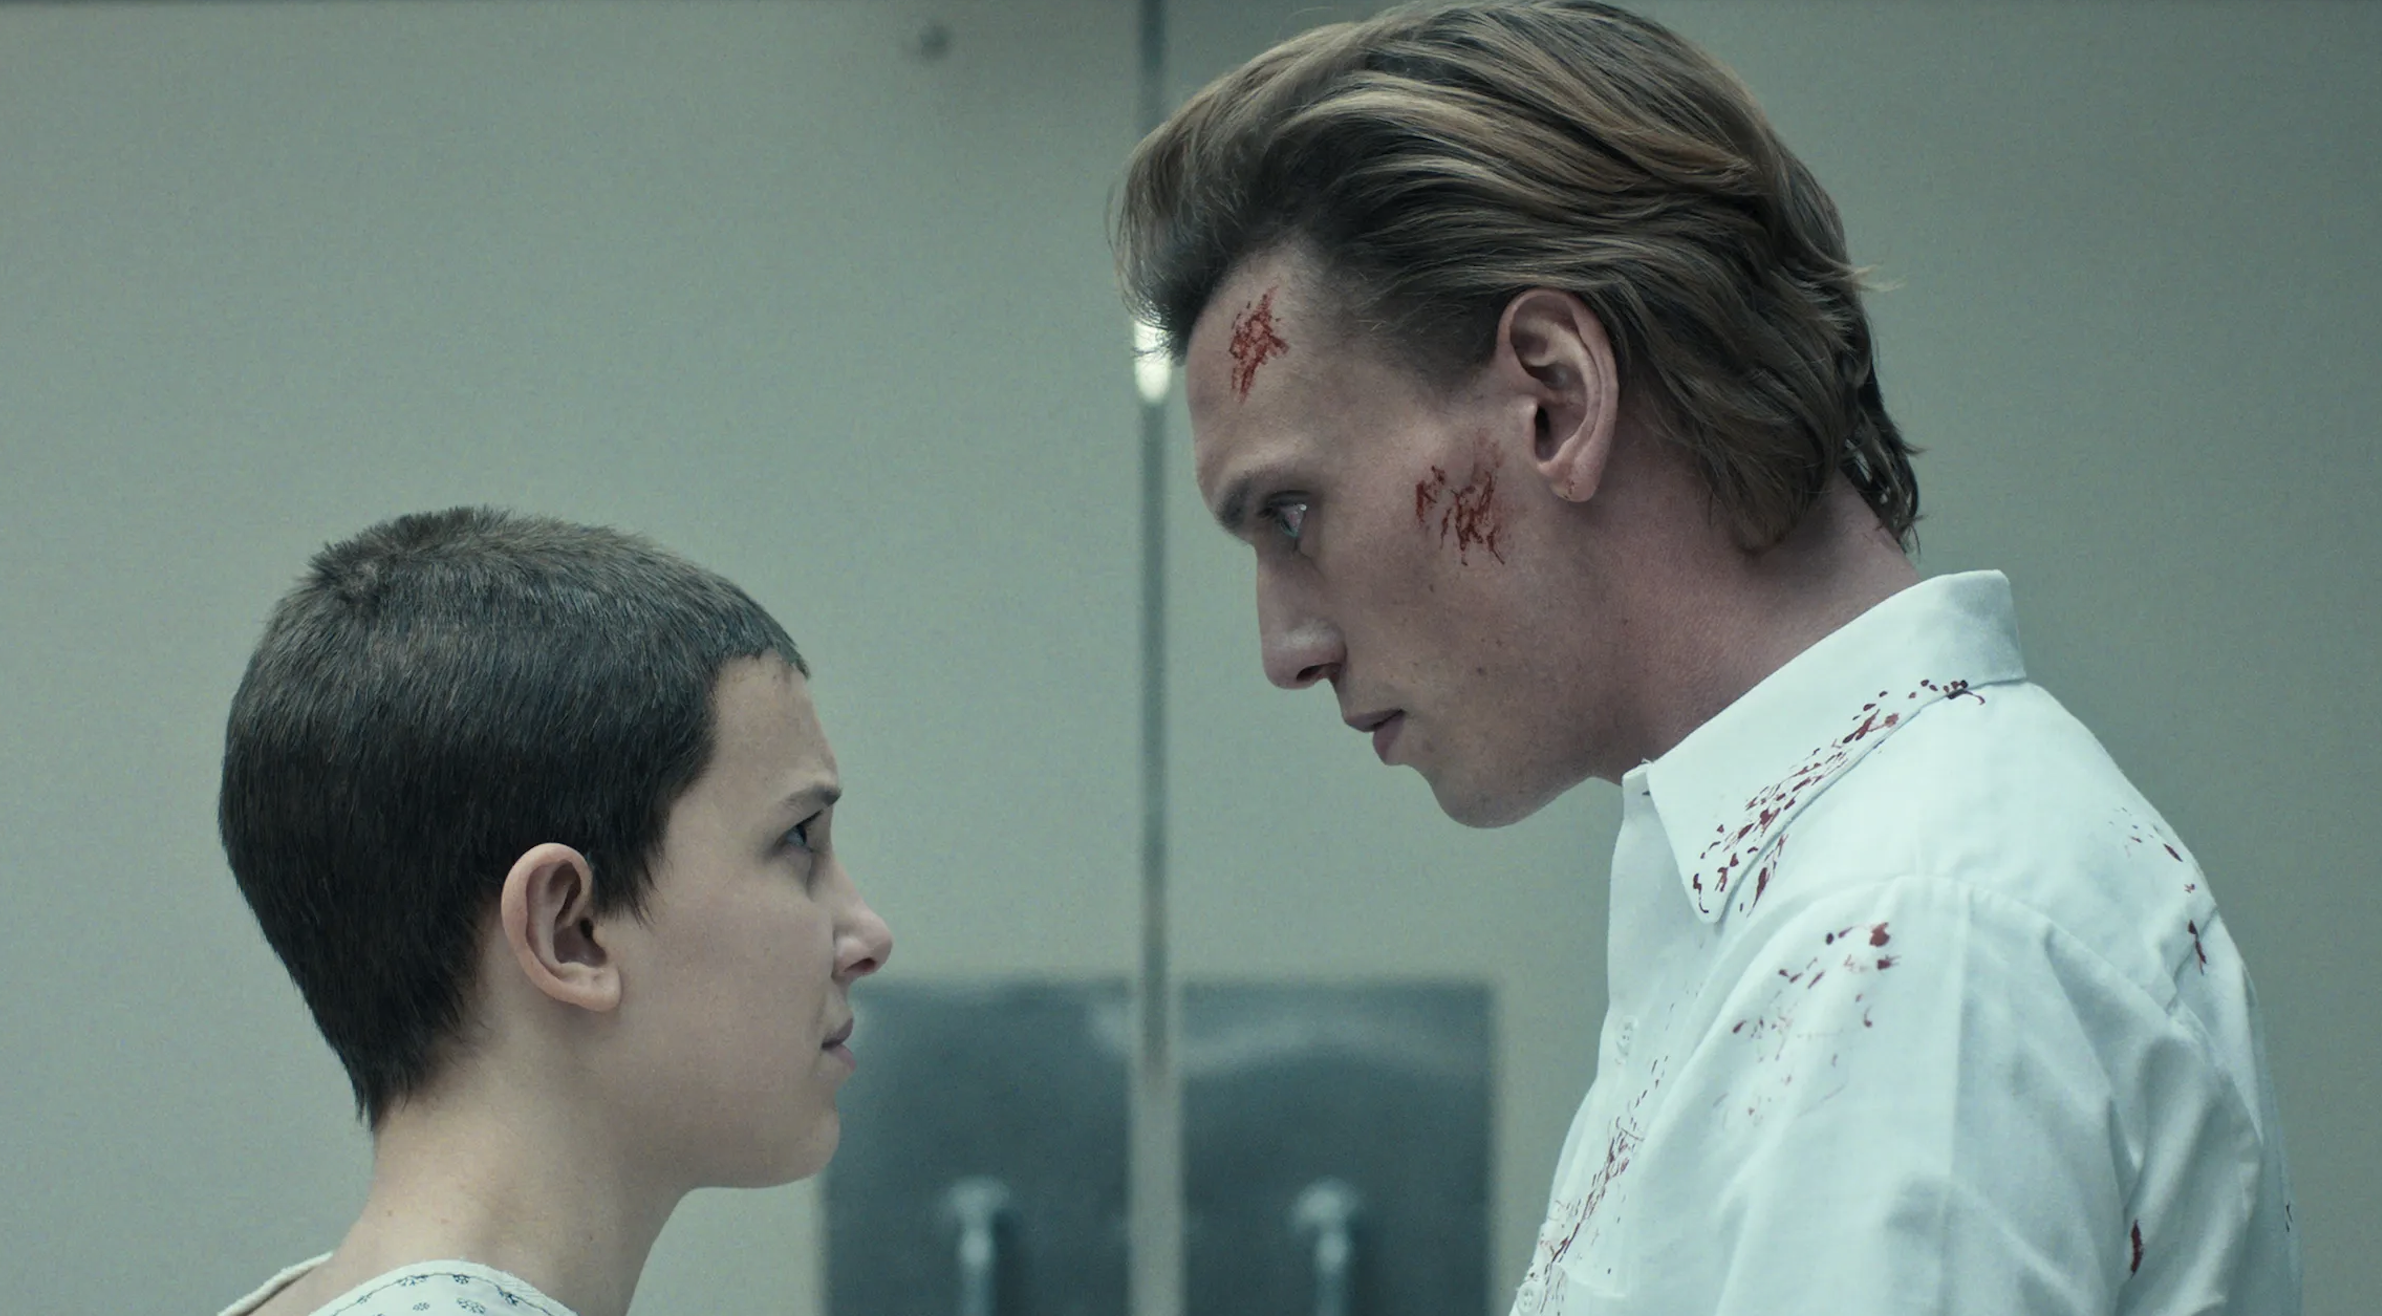 Millie Bobby brown as Eleven and Jamie Campbell Bower as a blood covered One